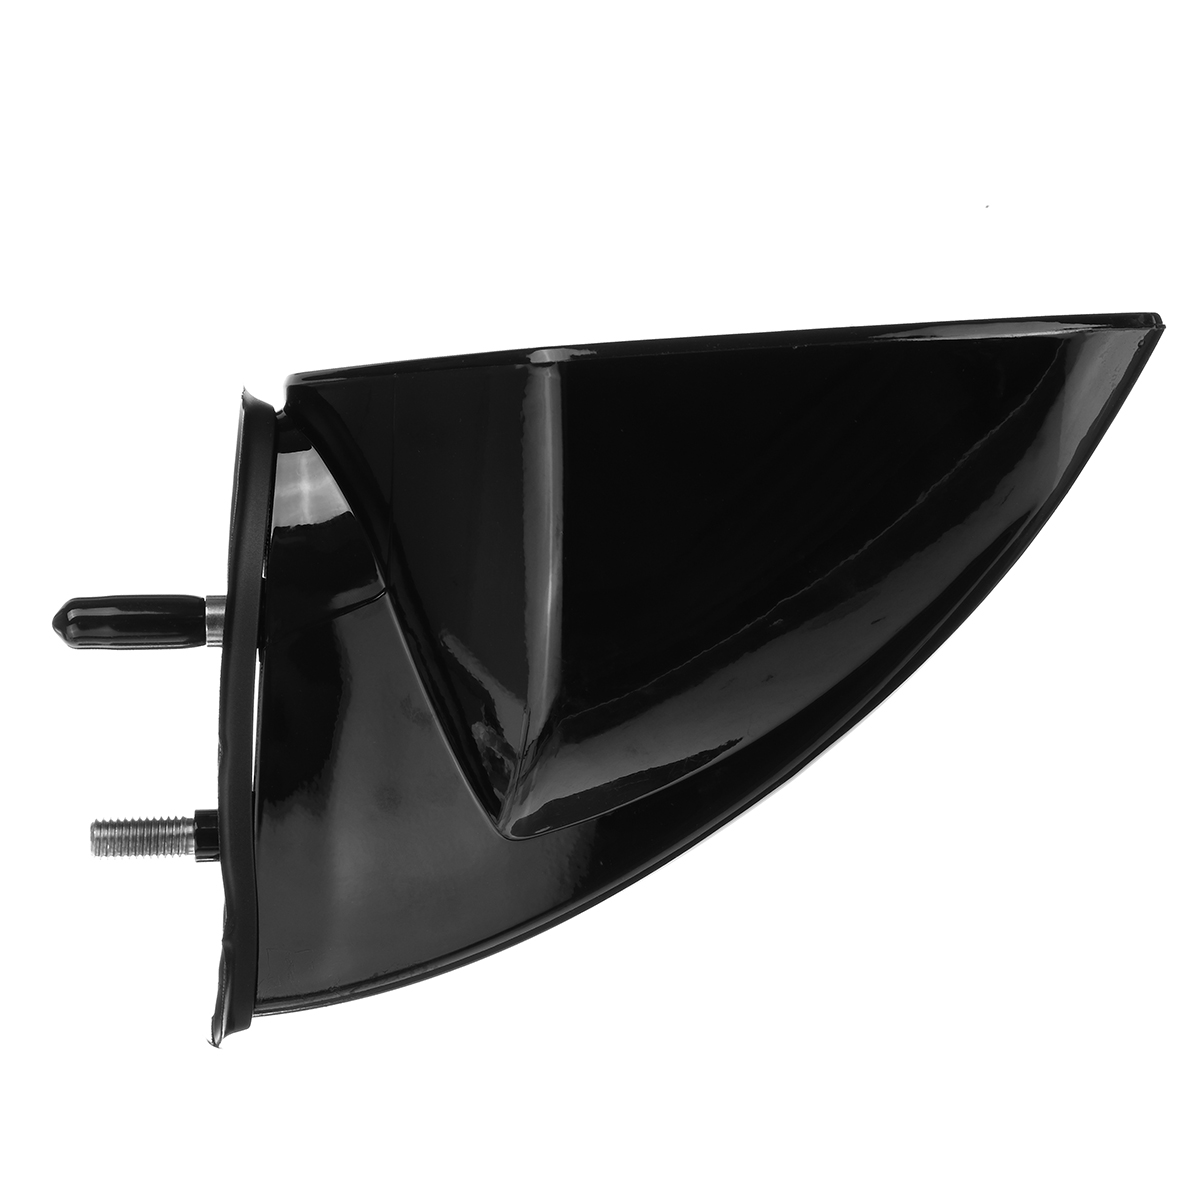 For Yamaha WaveRunner VX110 Deluxe Motorboat Motorcycle ABS Rearview Side Mirror 